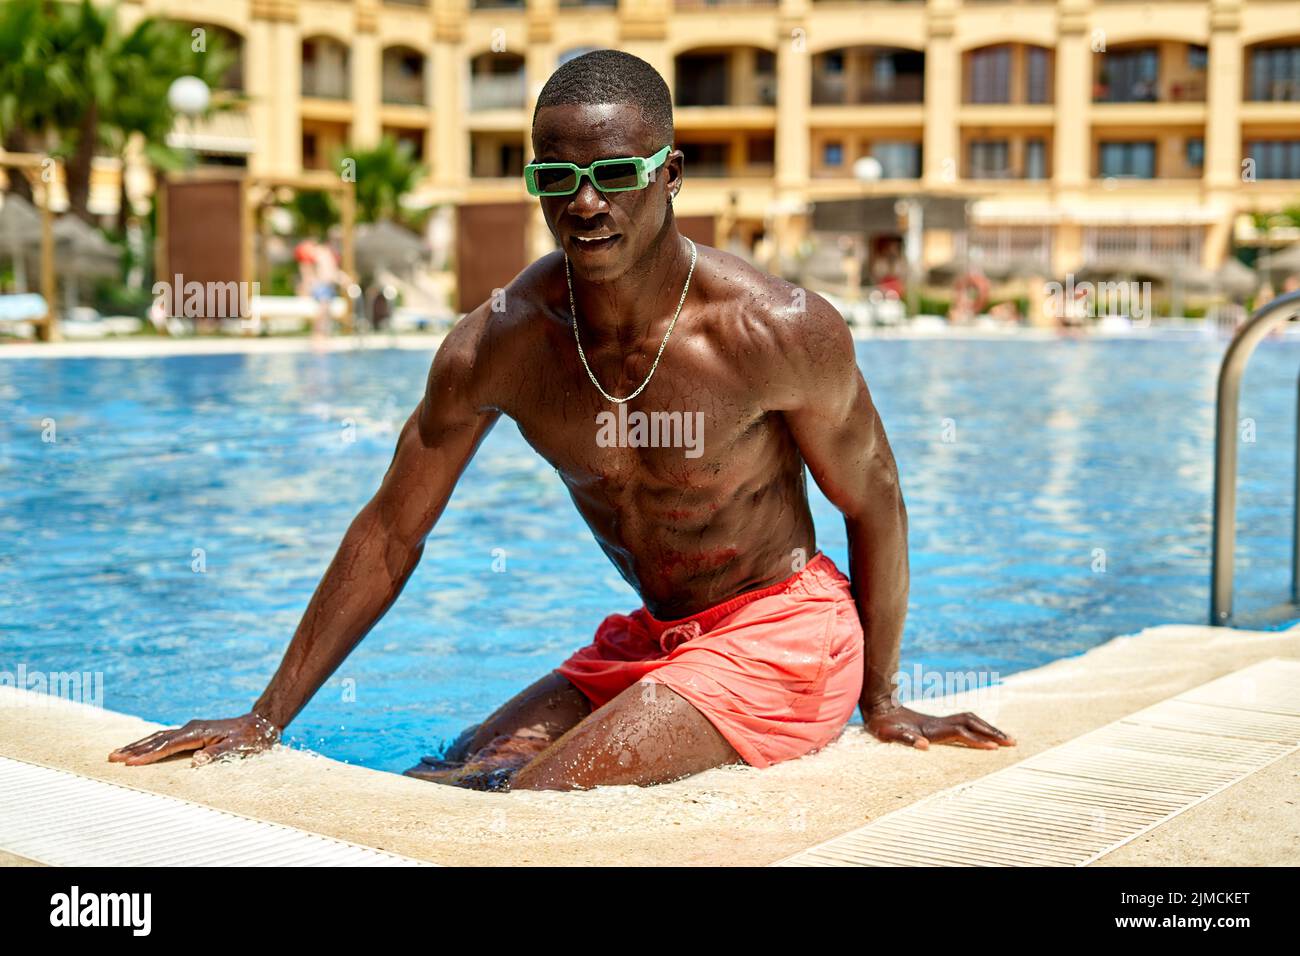 Confident shirtless African American male in sunglasses standing in swimming pool during summer vacation in tropical resort with multistory building Stock Photo